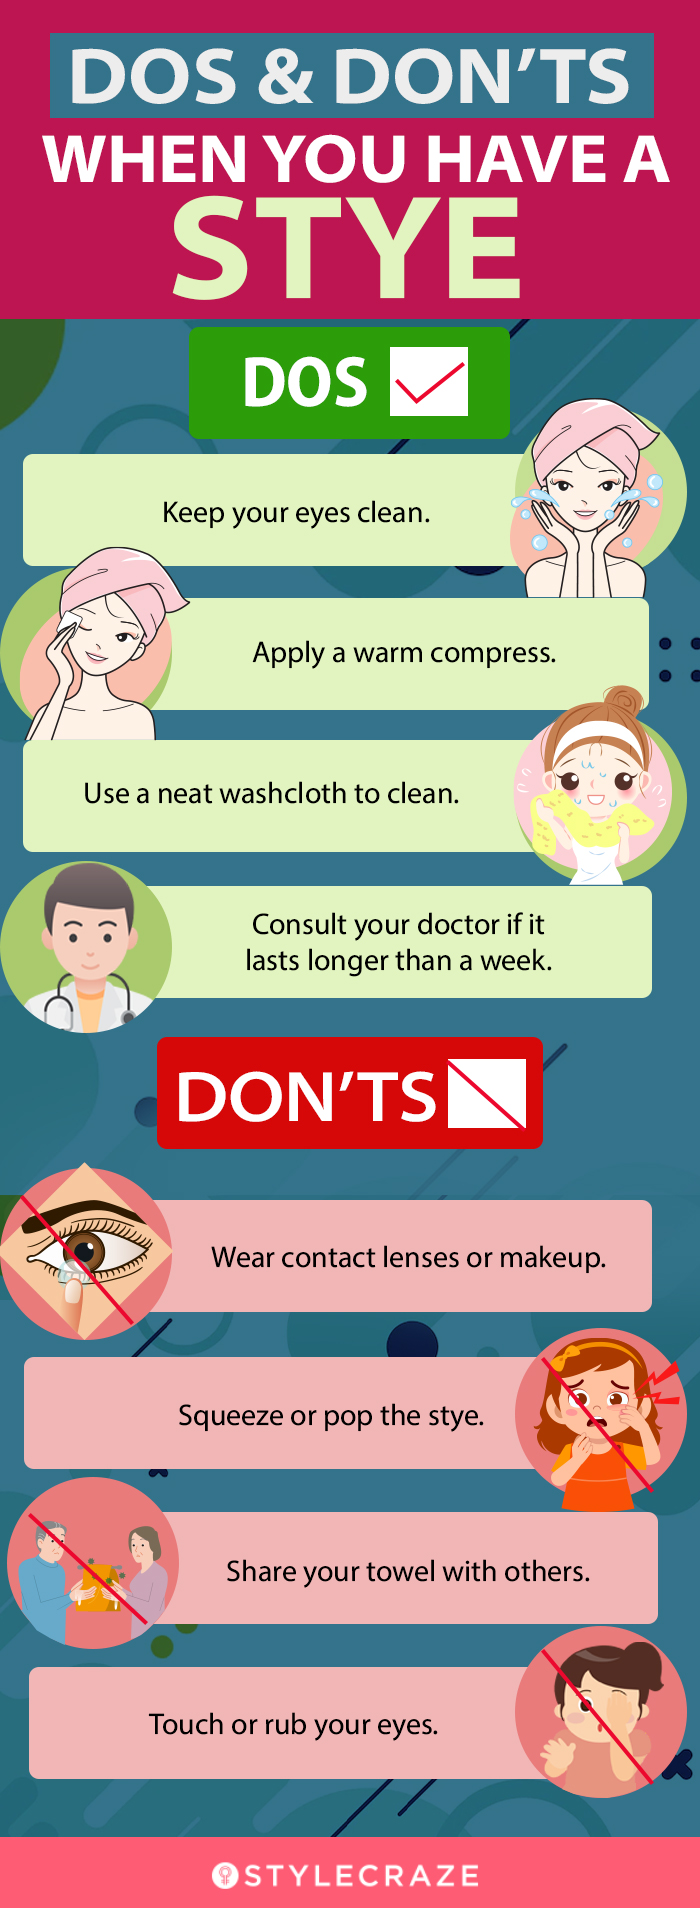 do’s & don’ts when you have a stye [infographic]